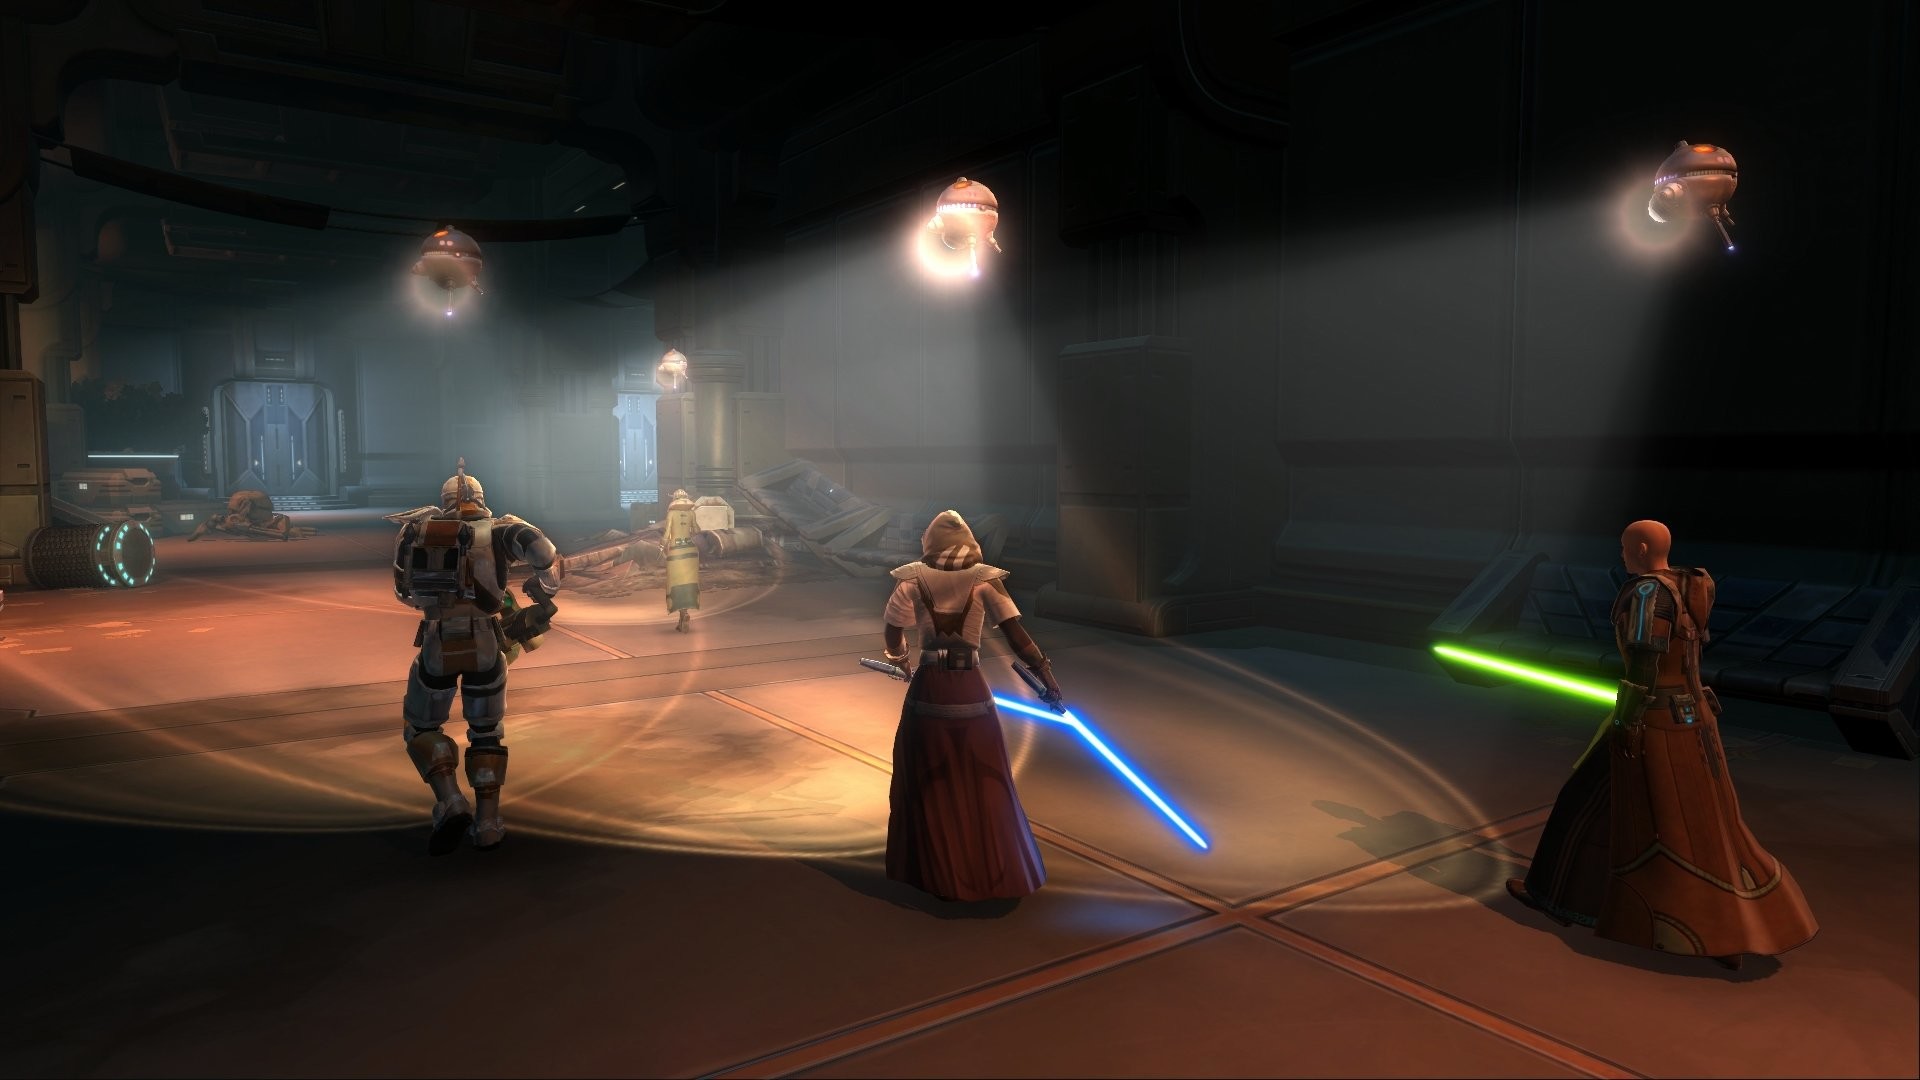 STAR WARS OLD REPUBLIC mmo rpg swtor fighting sci fi wallpaper 518949 WallpaperUP